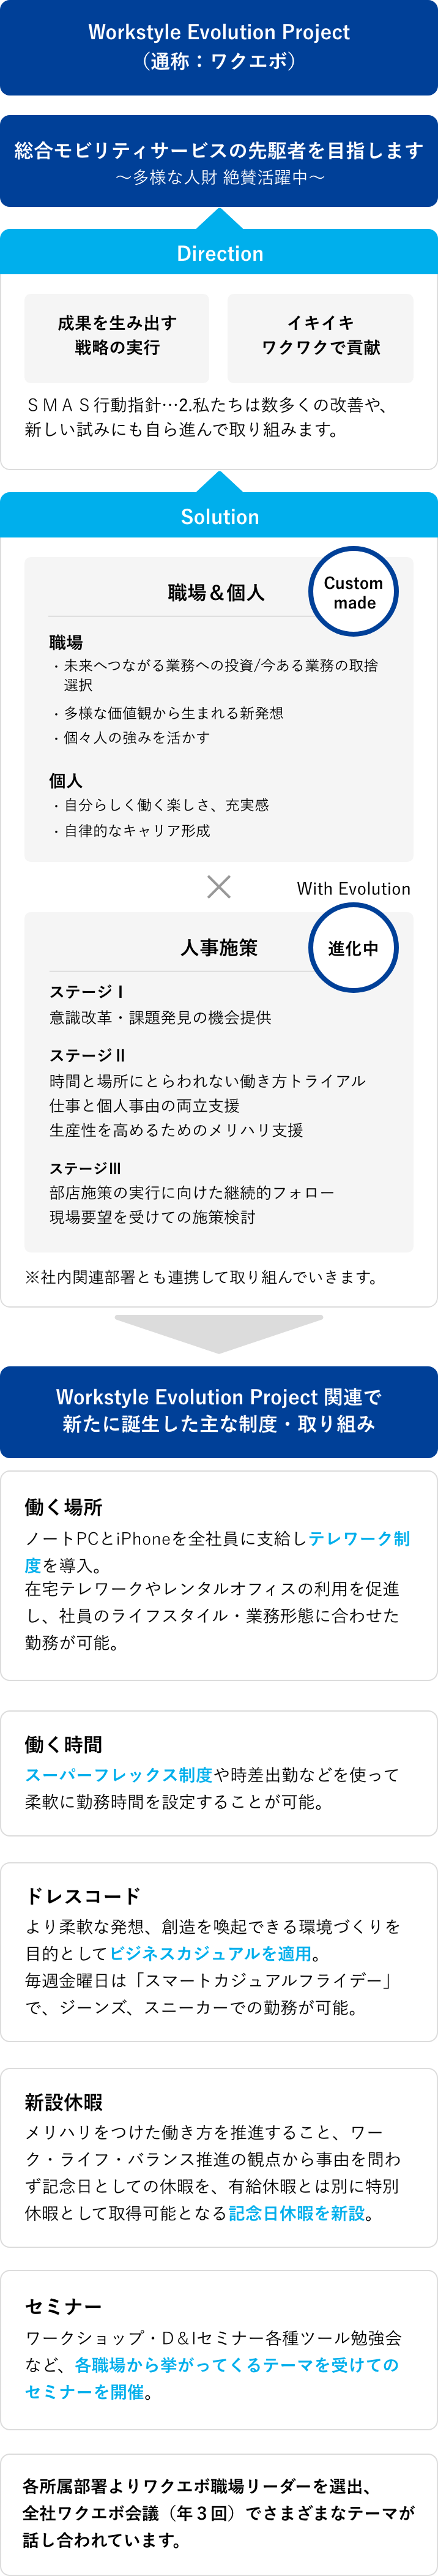 Workstyle Evolution Project